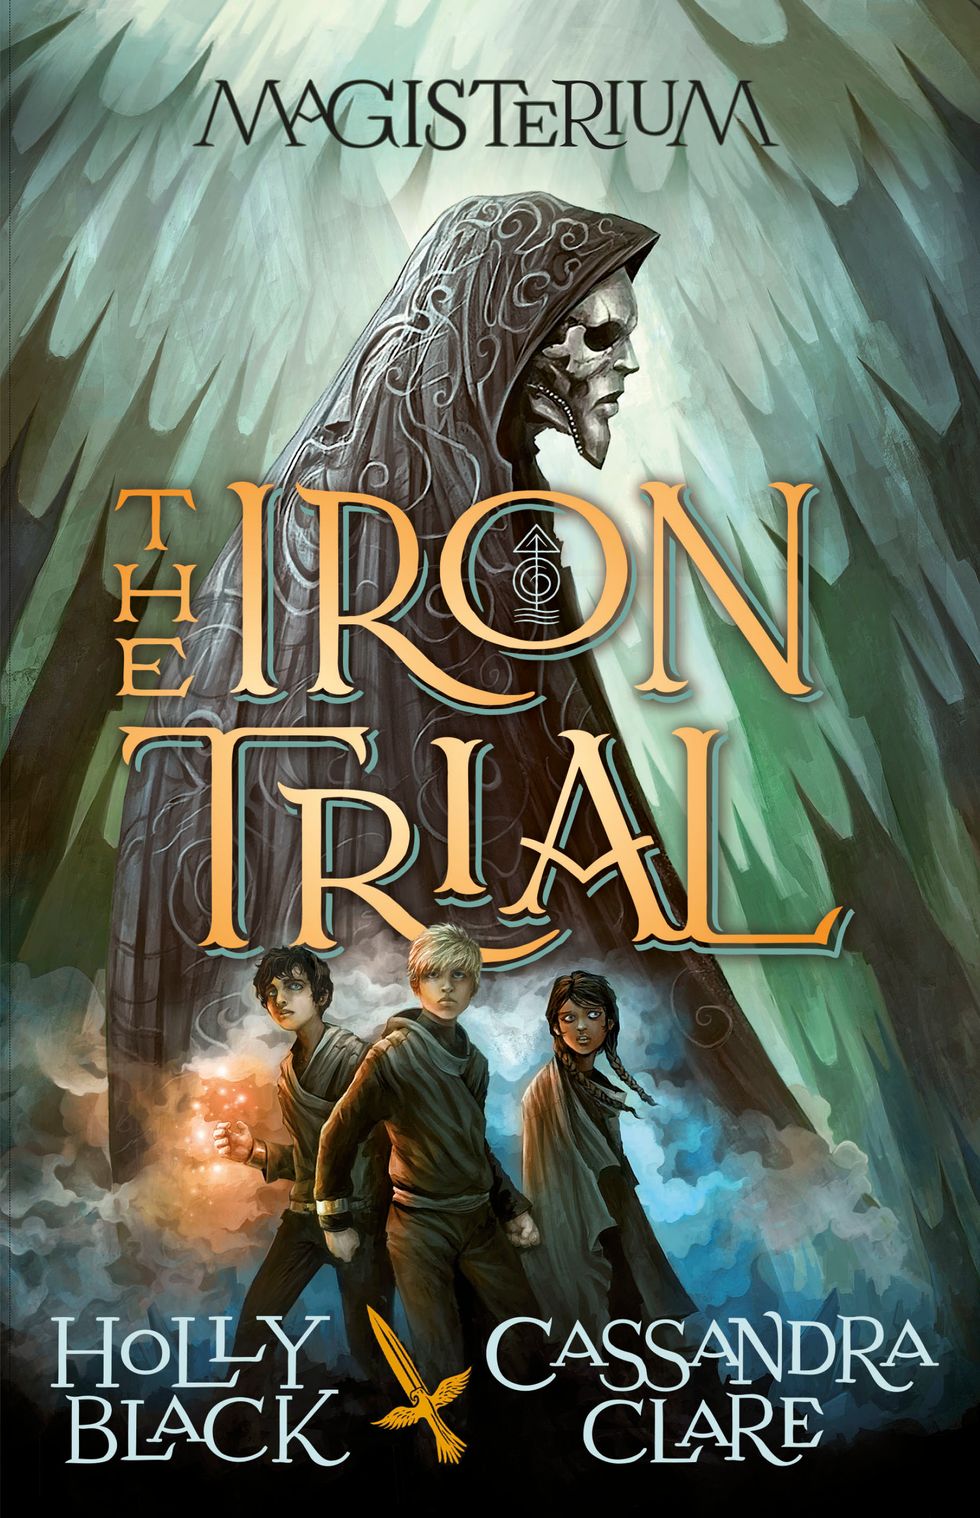 http://disabilityinkidlit.com/2015/03/20/review-the-iron-trial-by-holly-black-cassandra-clare/